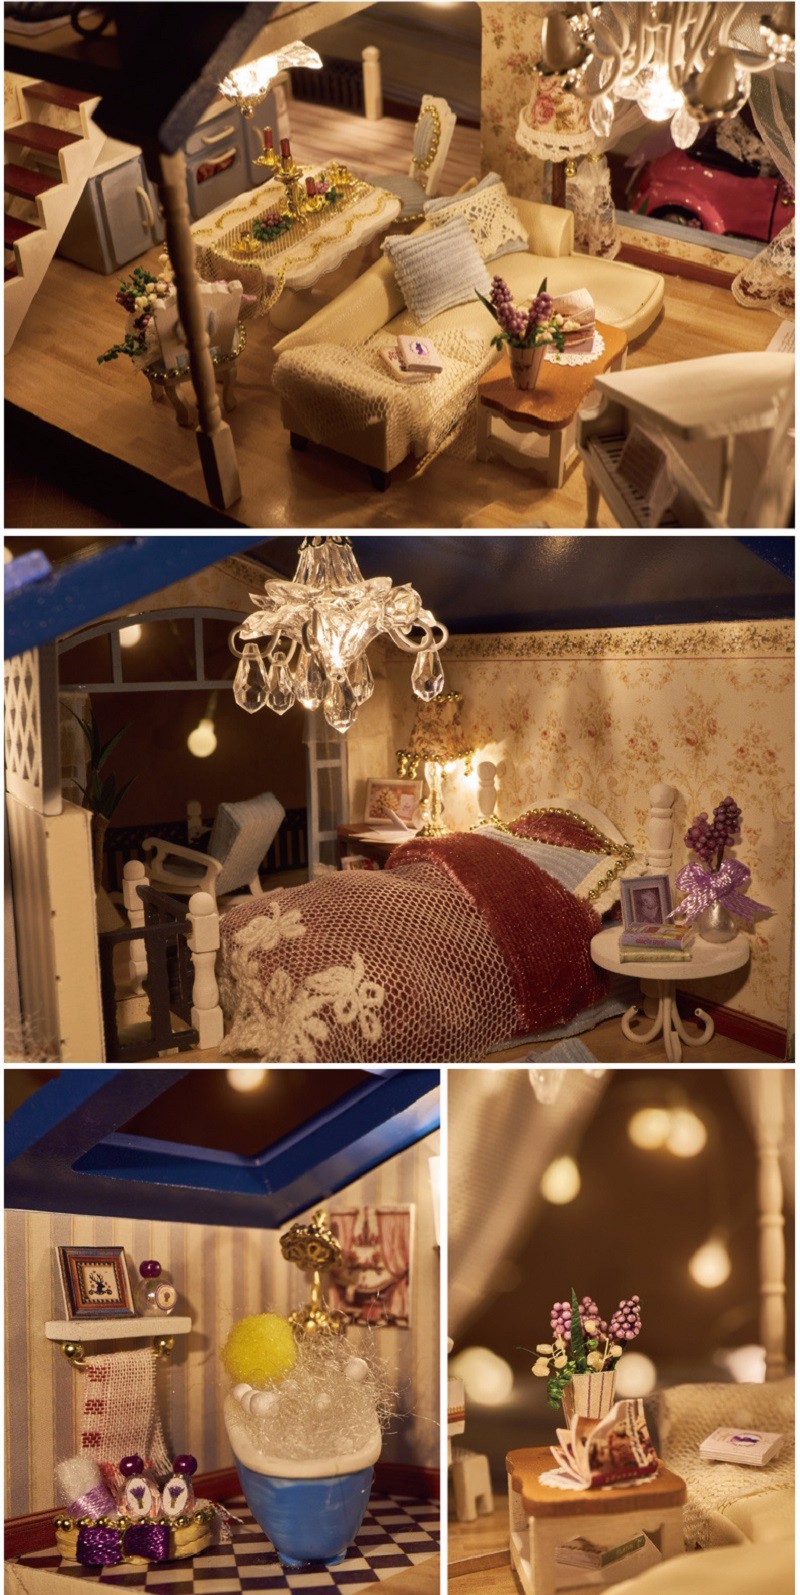 Cuteroom-124DIY-Handicraft-Miniature-Voice-Activated-LED-LightMusic-with-Cover-Provence-Dollhouse-1043545-4